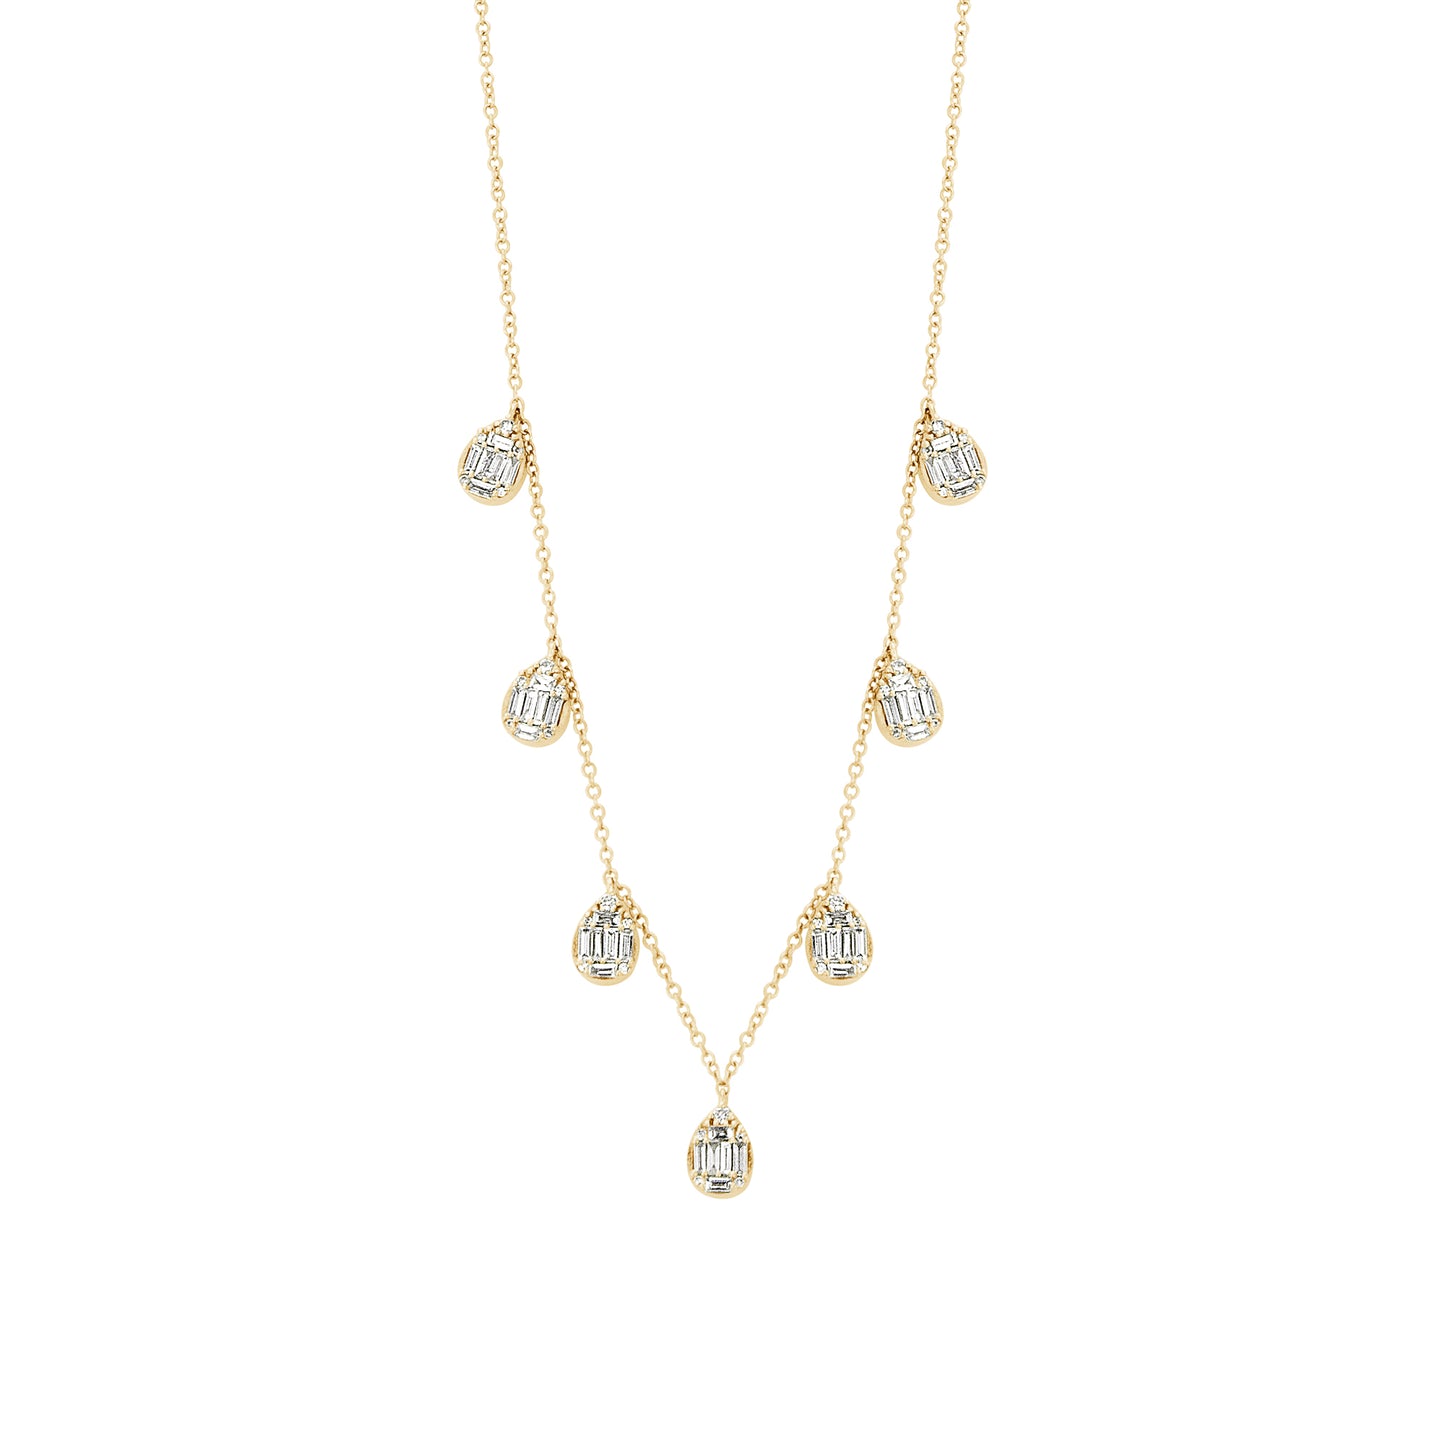 7 Cluster Pave Diamond Pears On Chain Necklace